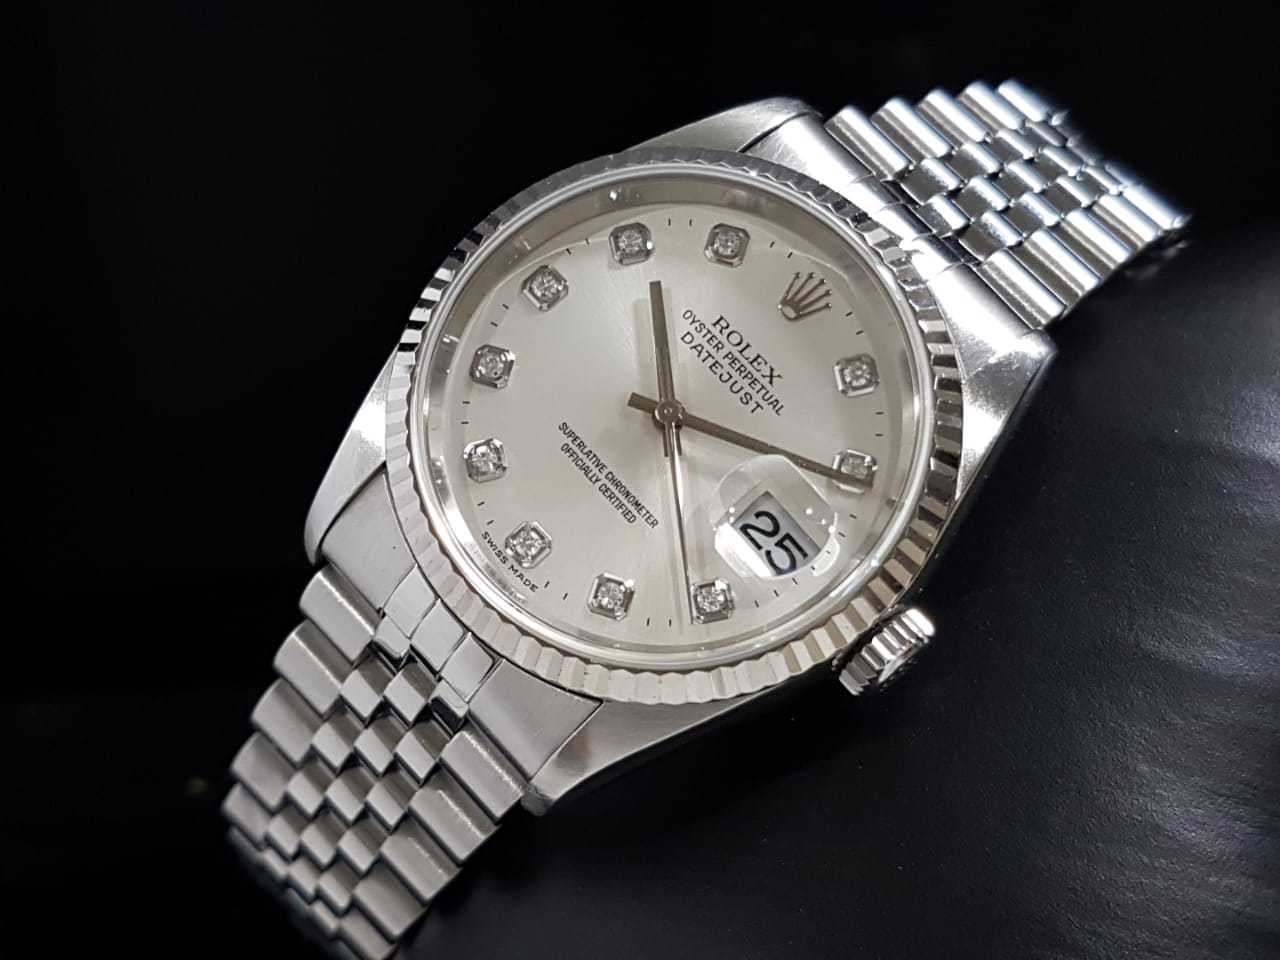 harga rolex oyster perpetual datejust